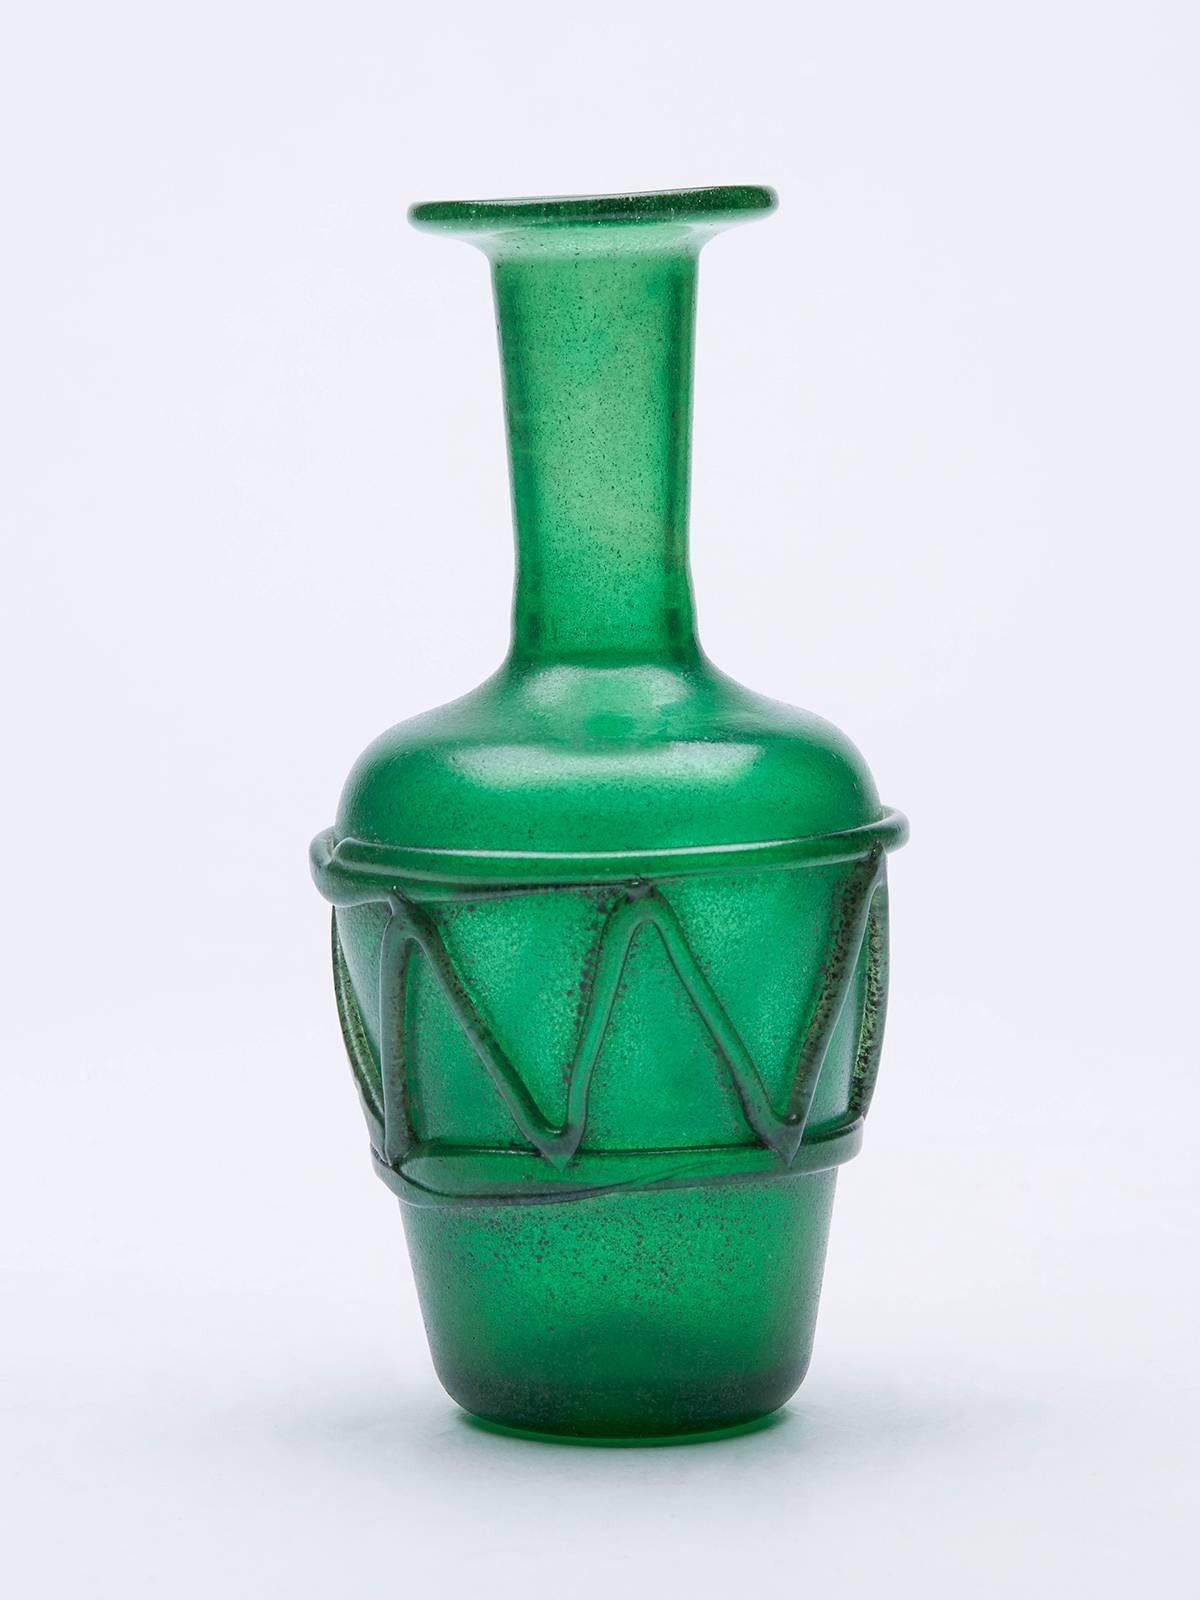 A stunning Italian Mid-Century handblown Murano glass vase in muted tones of green using the Scavo technique and hand applied with trailed patterned detail. Attributed to Seguso the vase has recessed rough pontil mark and is not